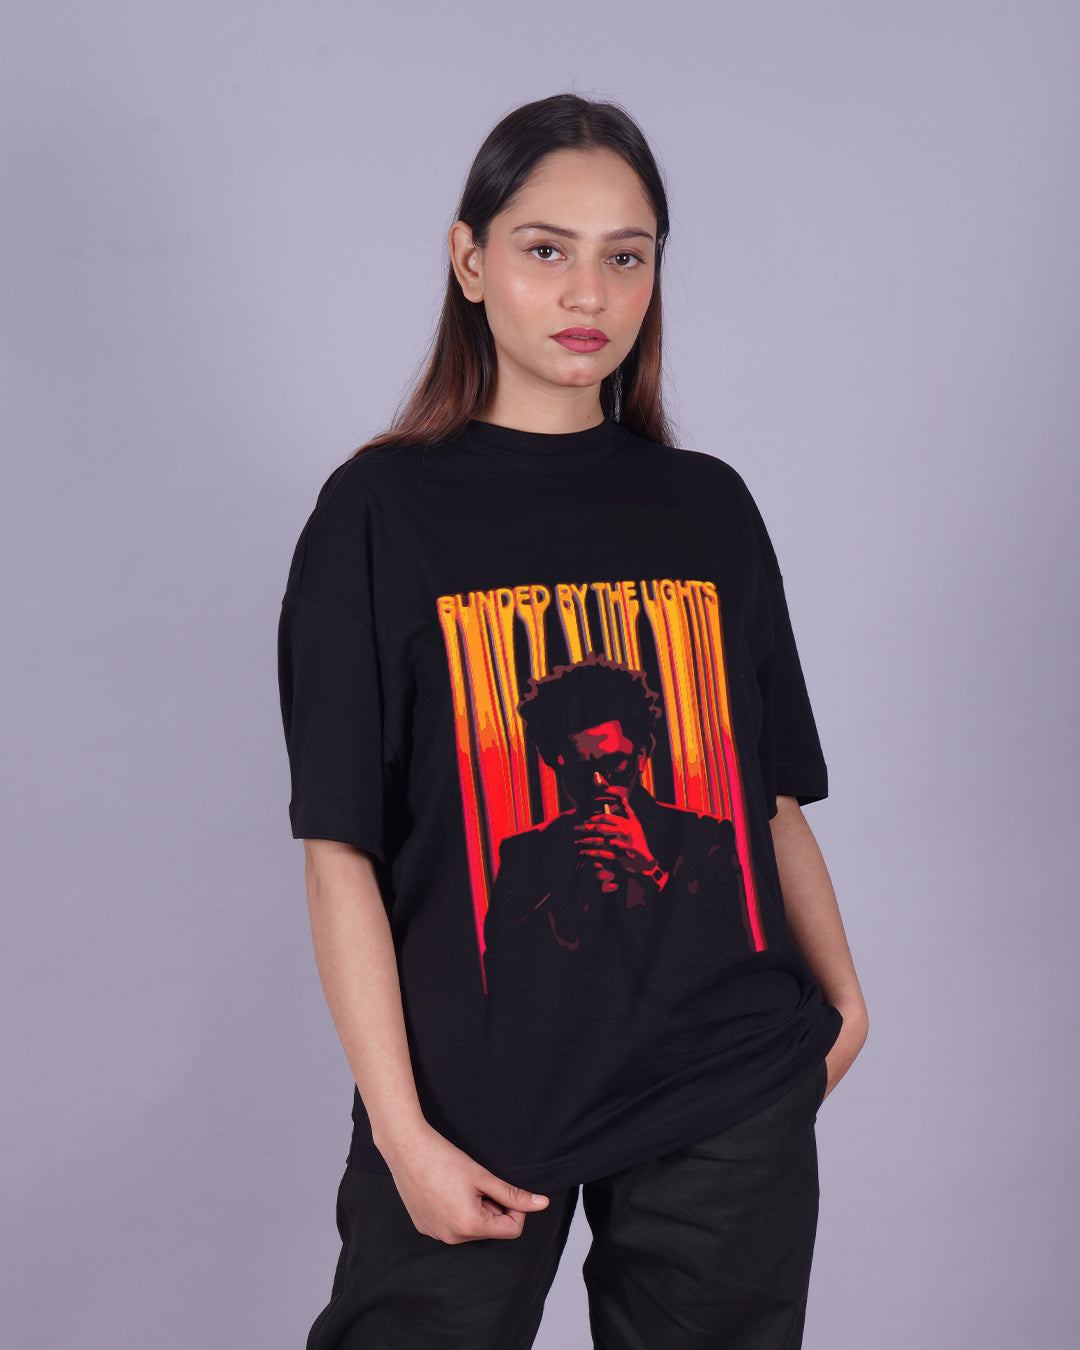 Pair of Women's The Weekend Oversized Tees: Starboy & Blinded By The Lights